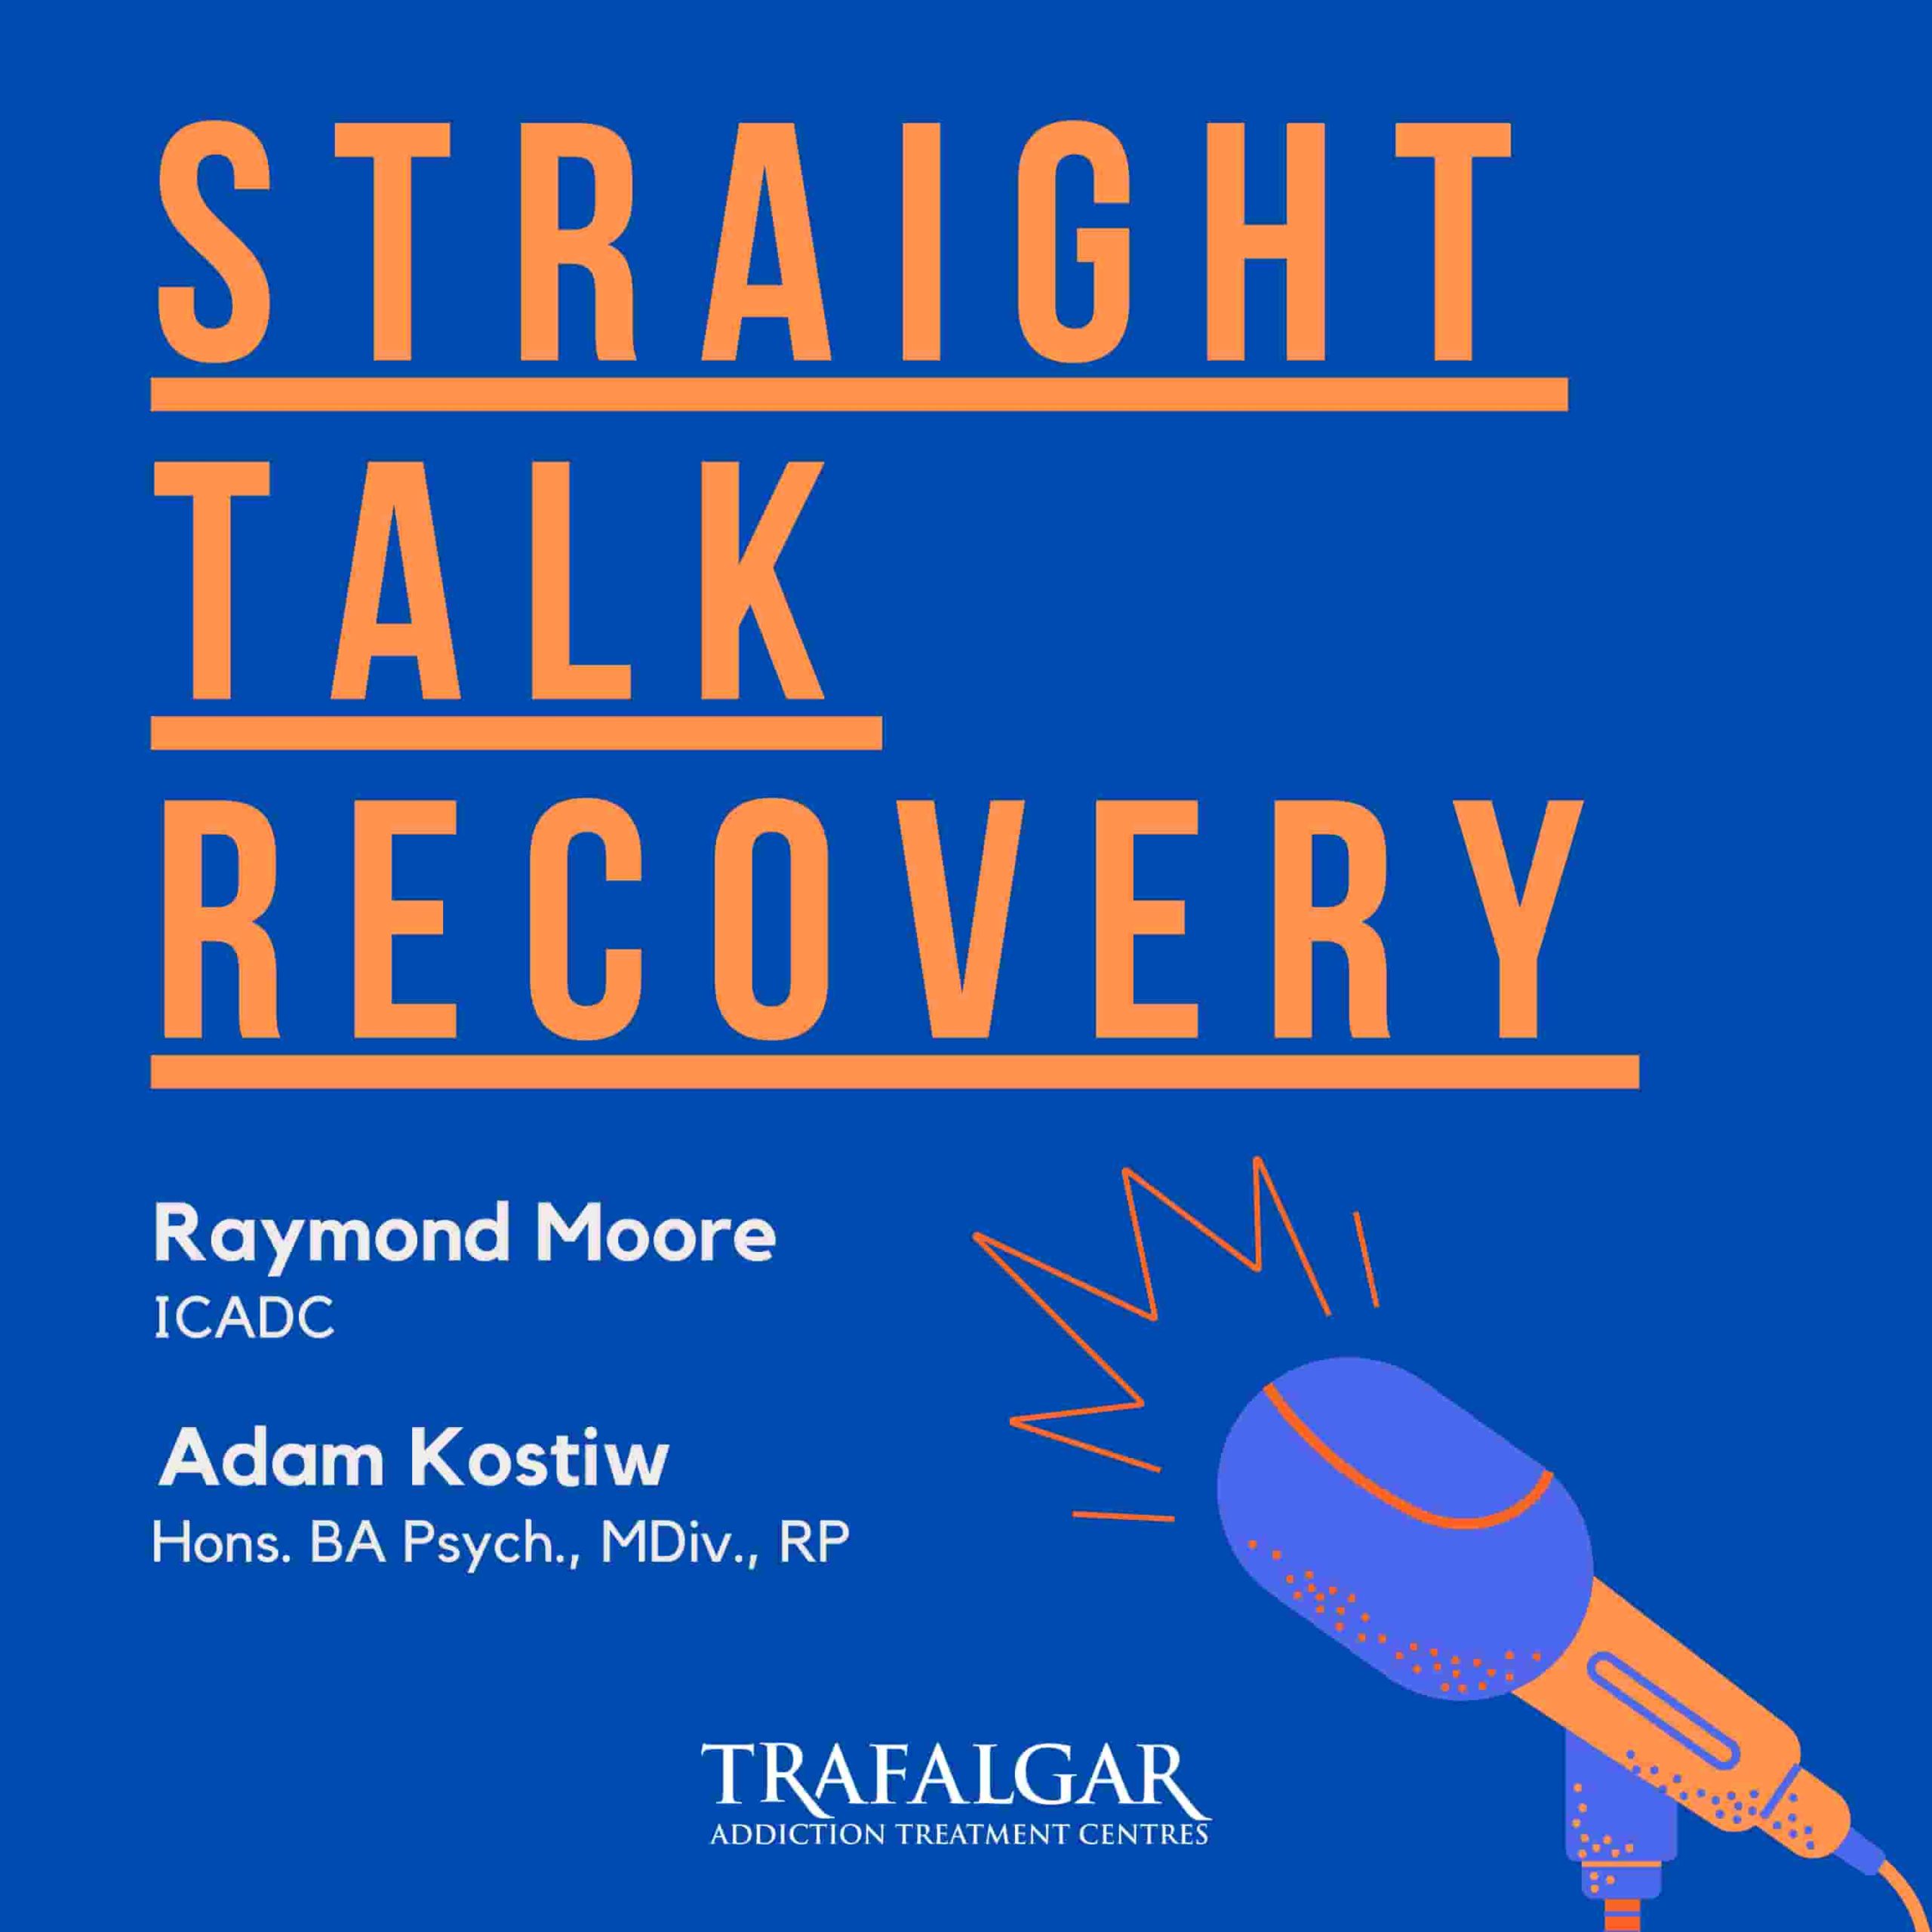 Straight Talk Recovery Podcast Cover Image.